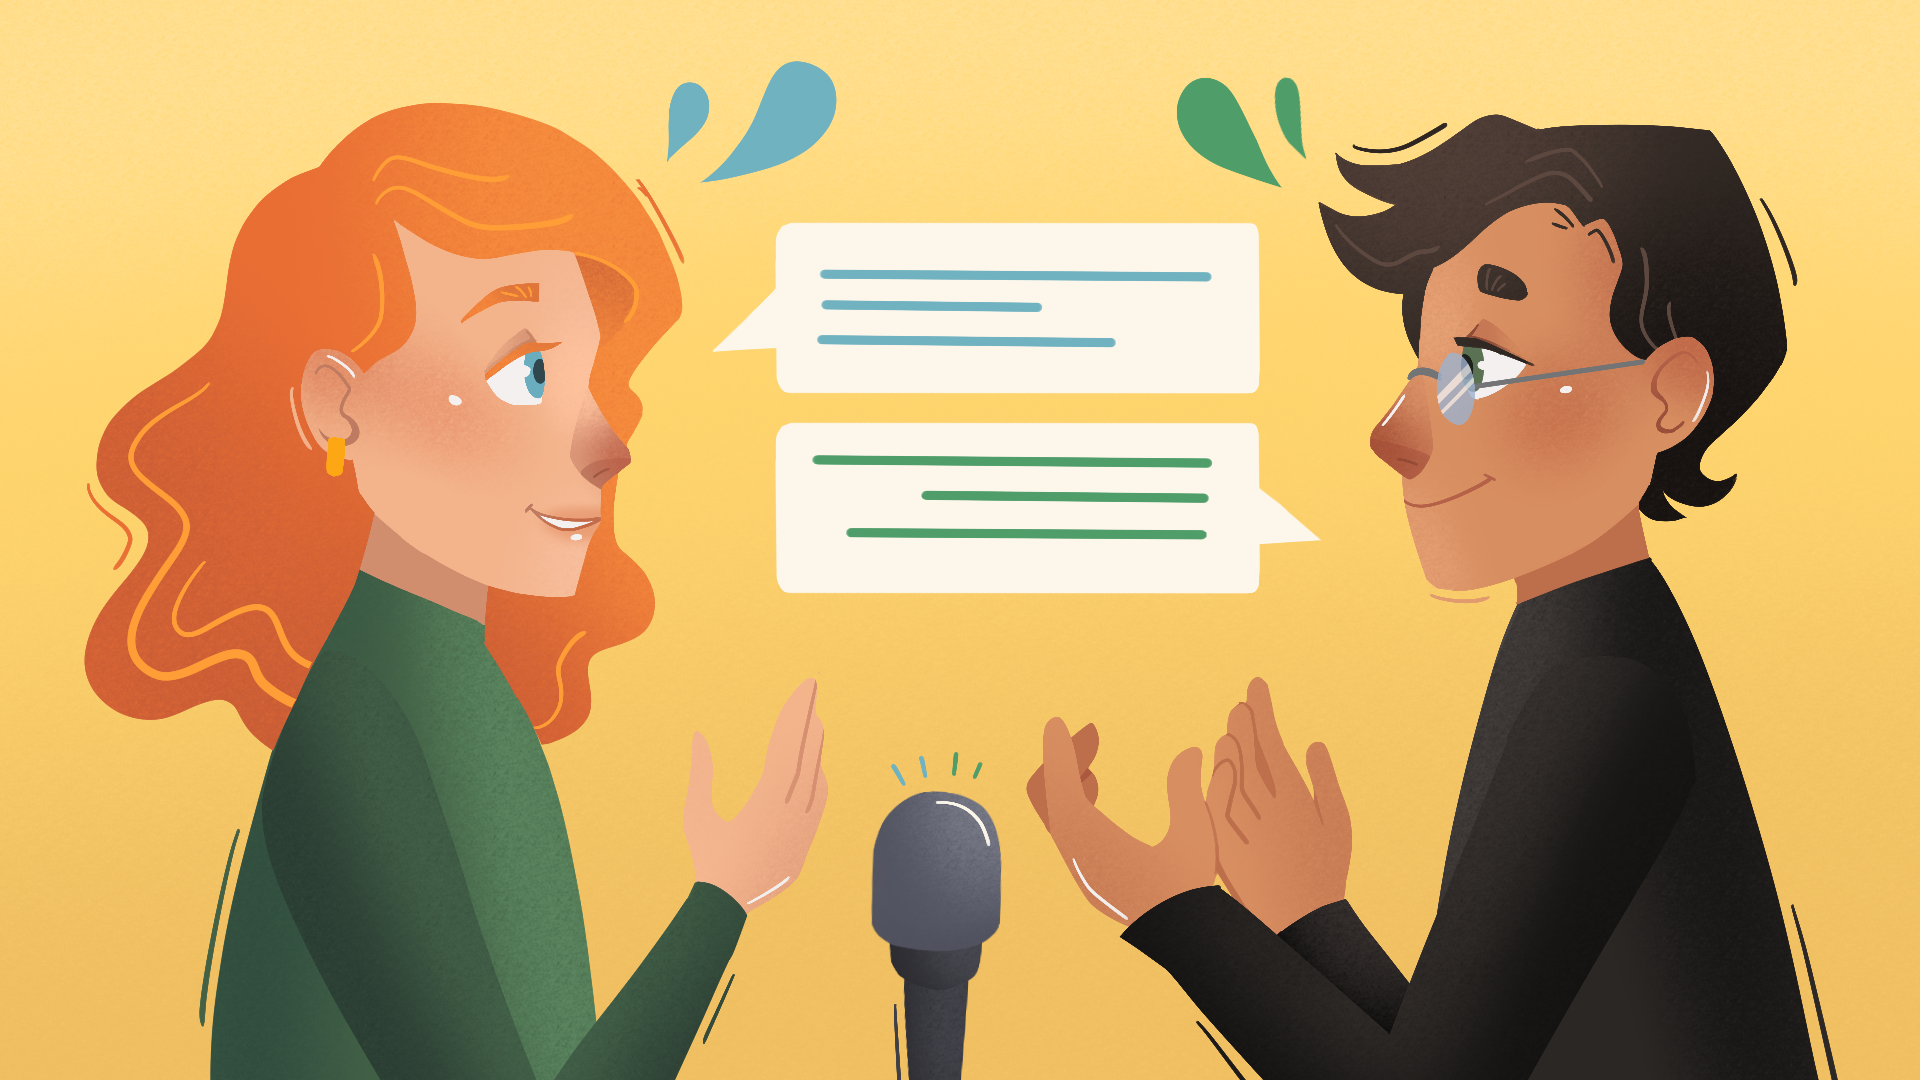 An animated man and woman talking to each other over a microphone.